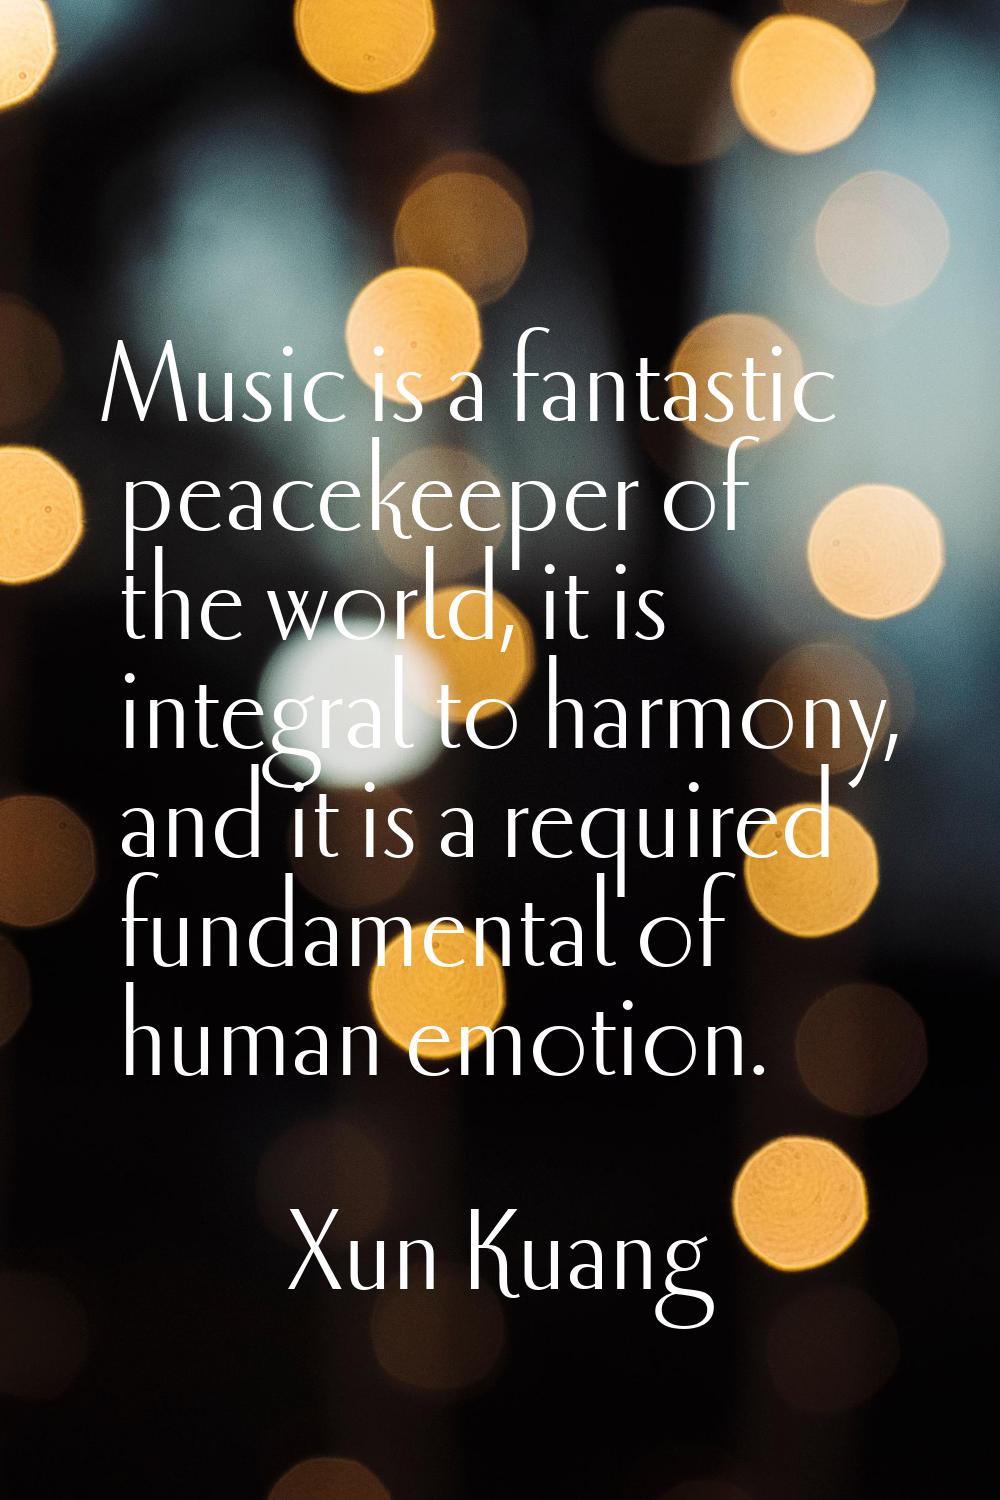 Music is a fantastic peacekeeper of the world, it is integral to harmony, and it is a required fund